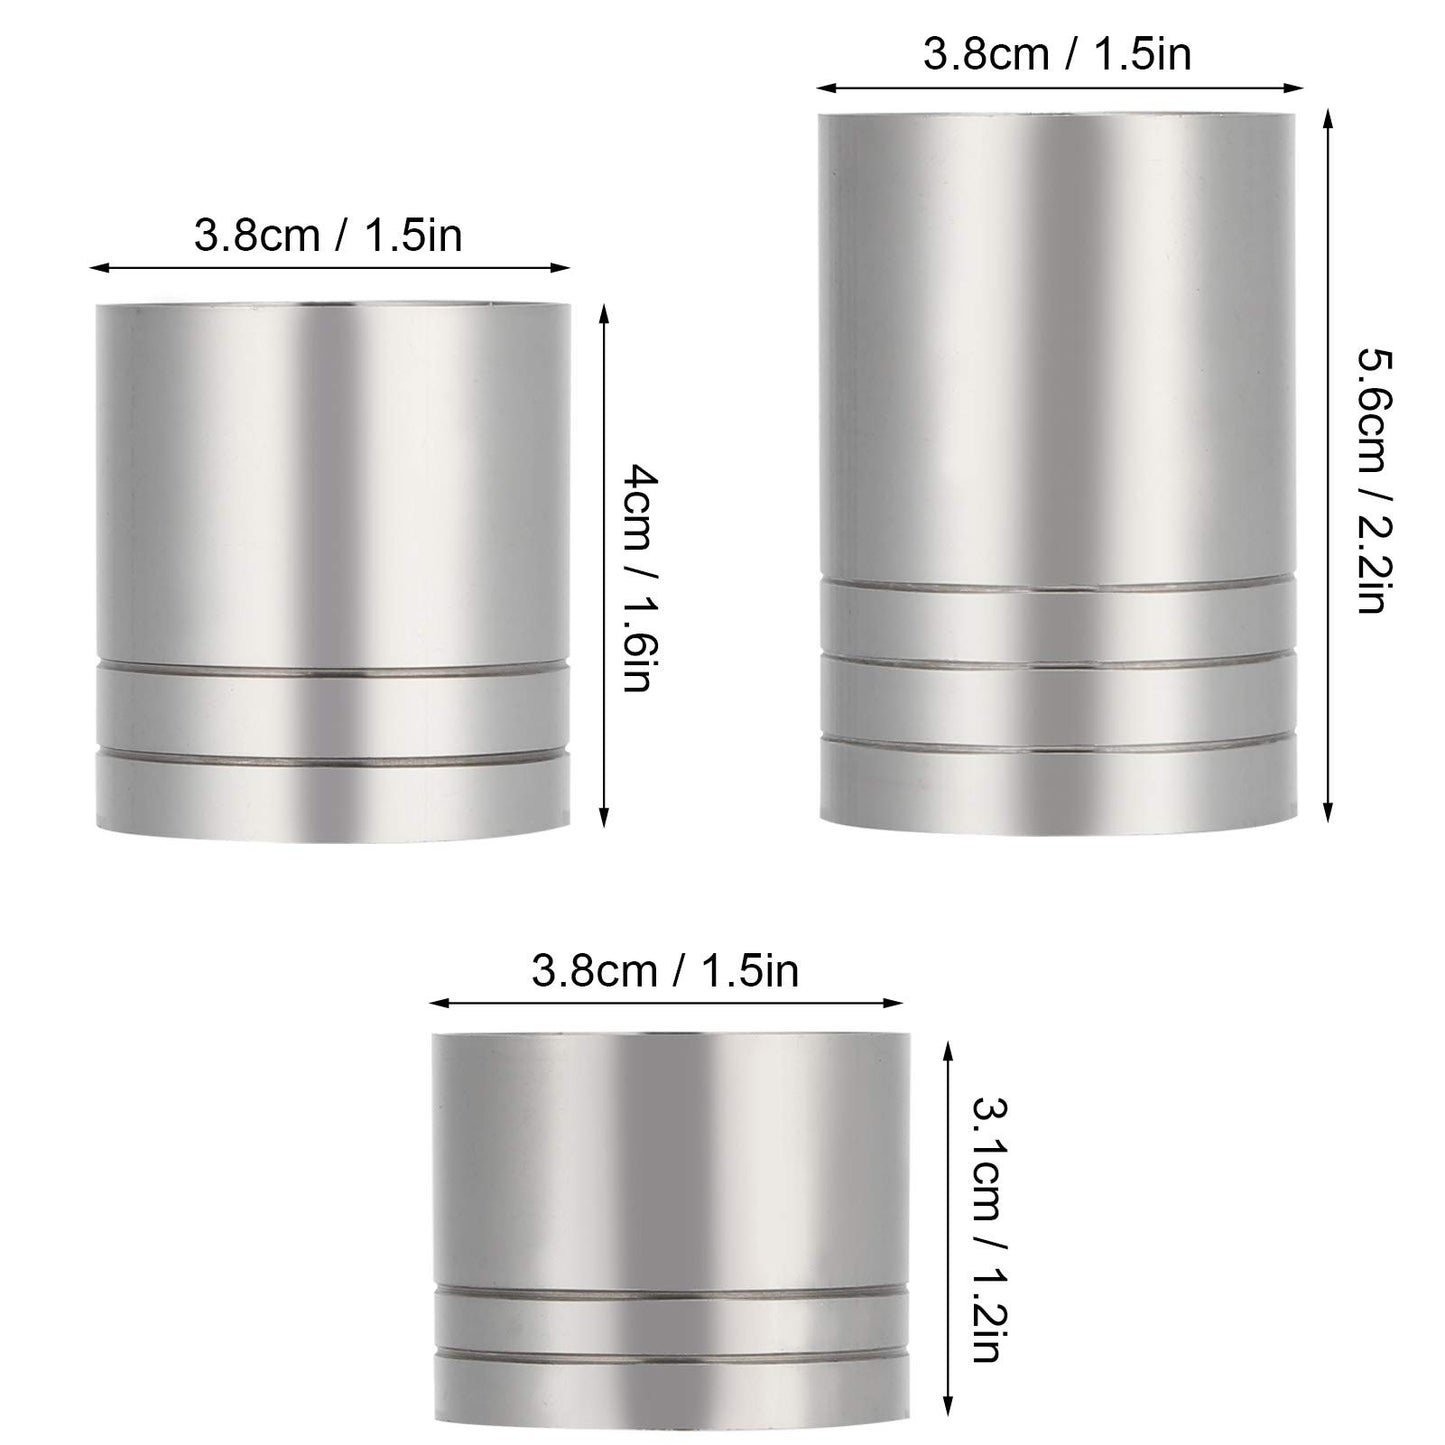 Premium Stainless Steel Cocktail Jigger Bar Drink Measuring Cup Ounce Cup Set Bartender Tool Three-Piece Suit(25ml+35ml+50ml) Cocktail Shaker Sets Bartender Tool Cup